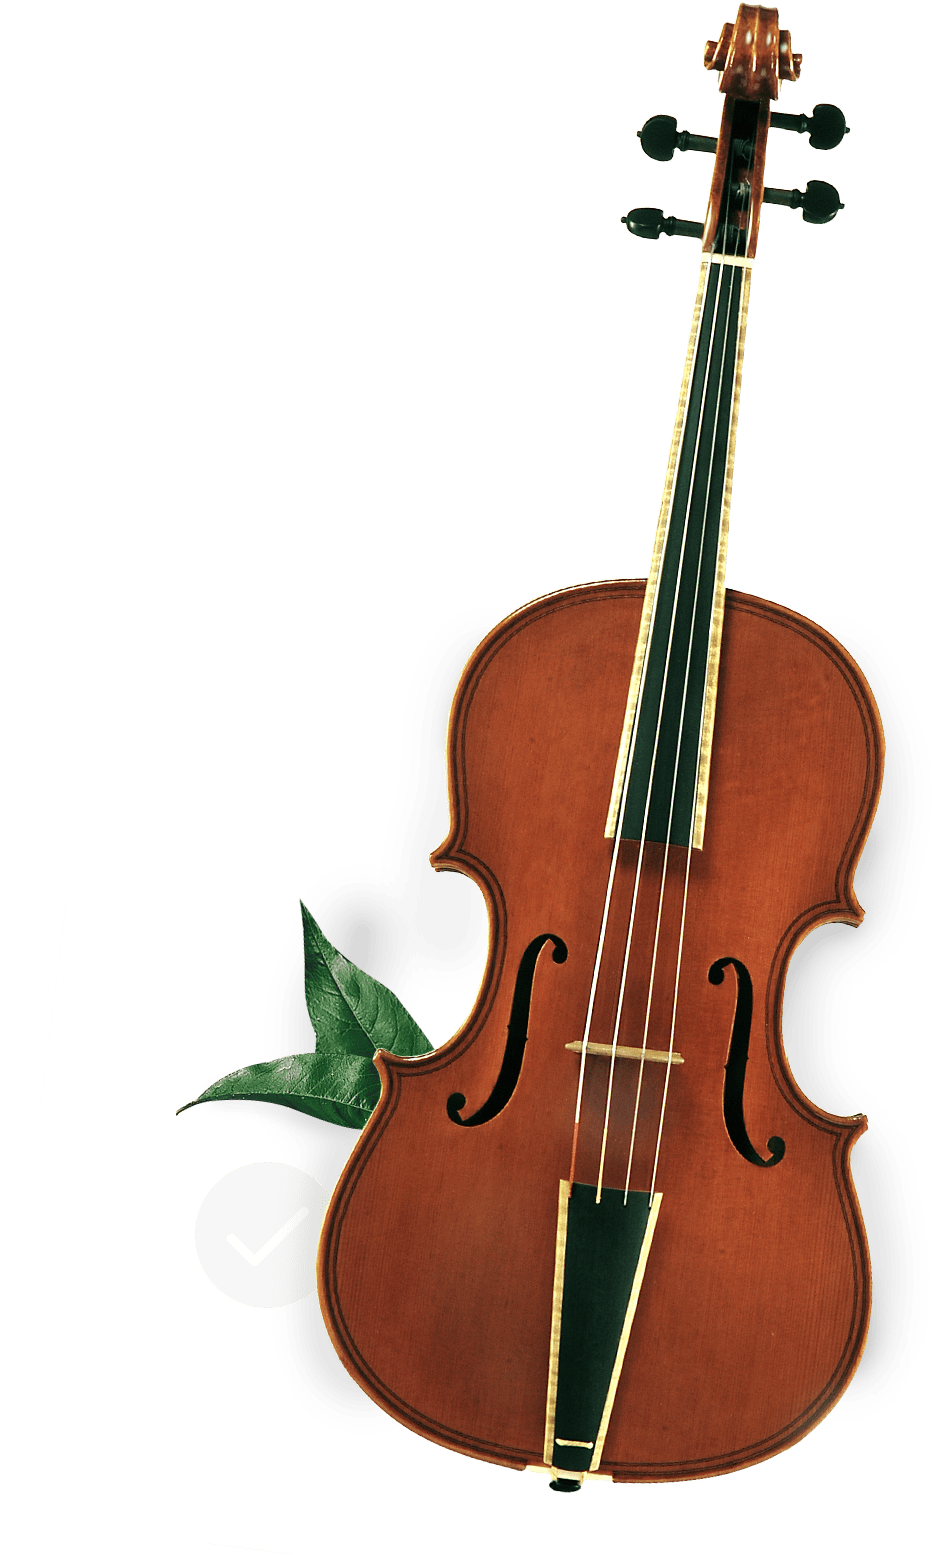 A Violin With Leaves On A Black Background